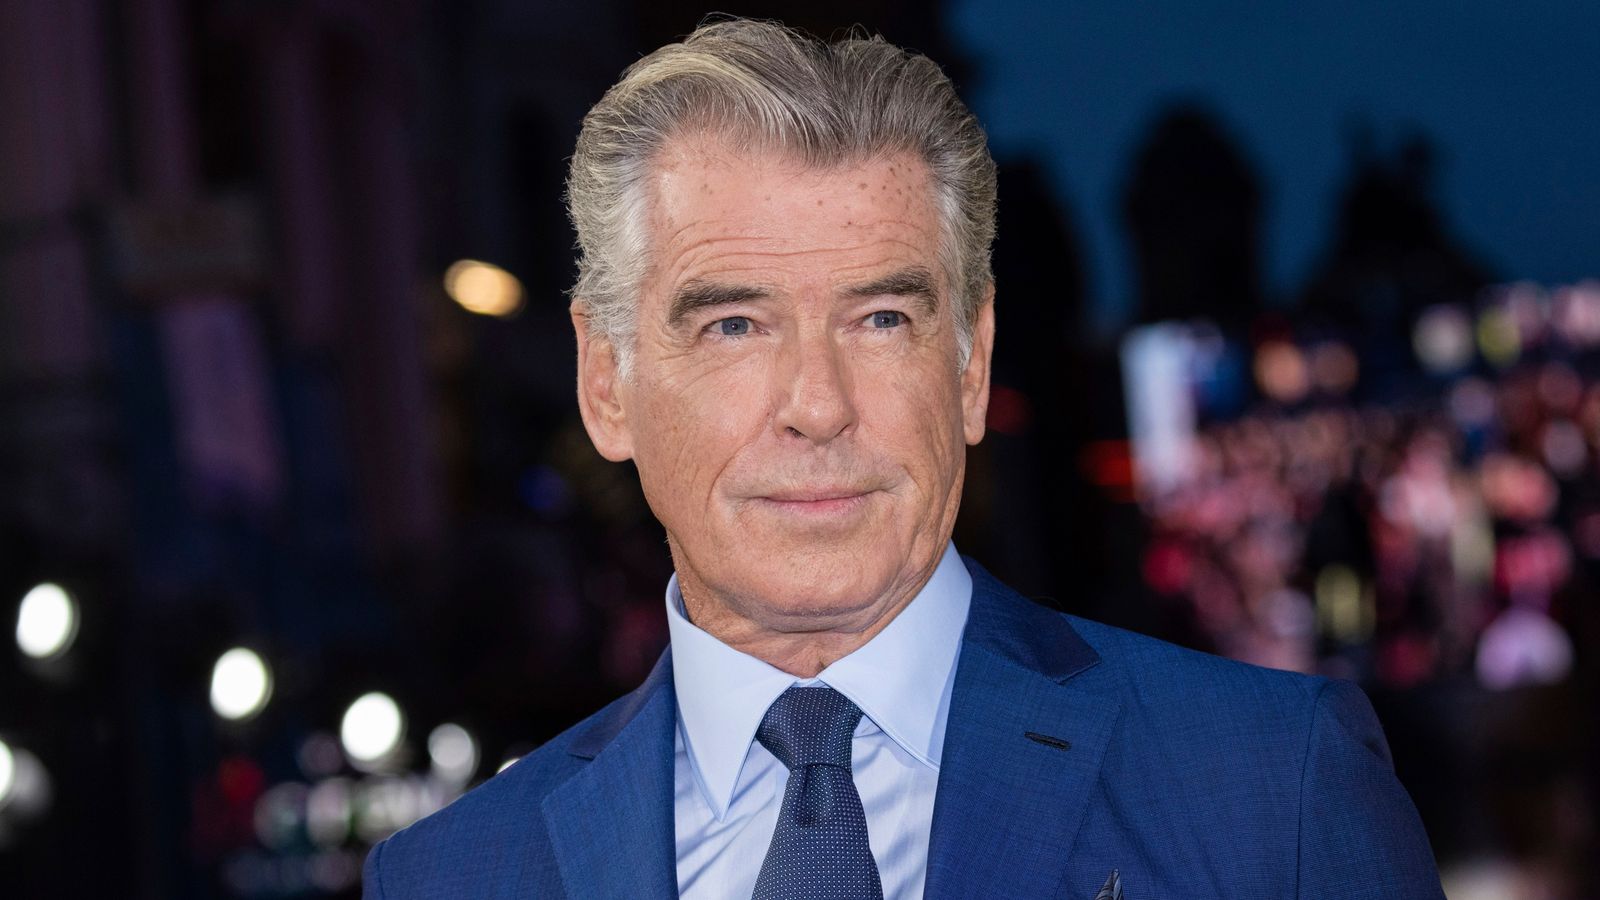 Man arrested after entering Pierce Brosnan's Malibu estate and using his outdoor shower - report